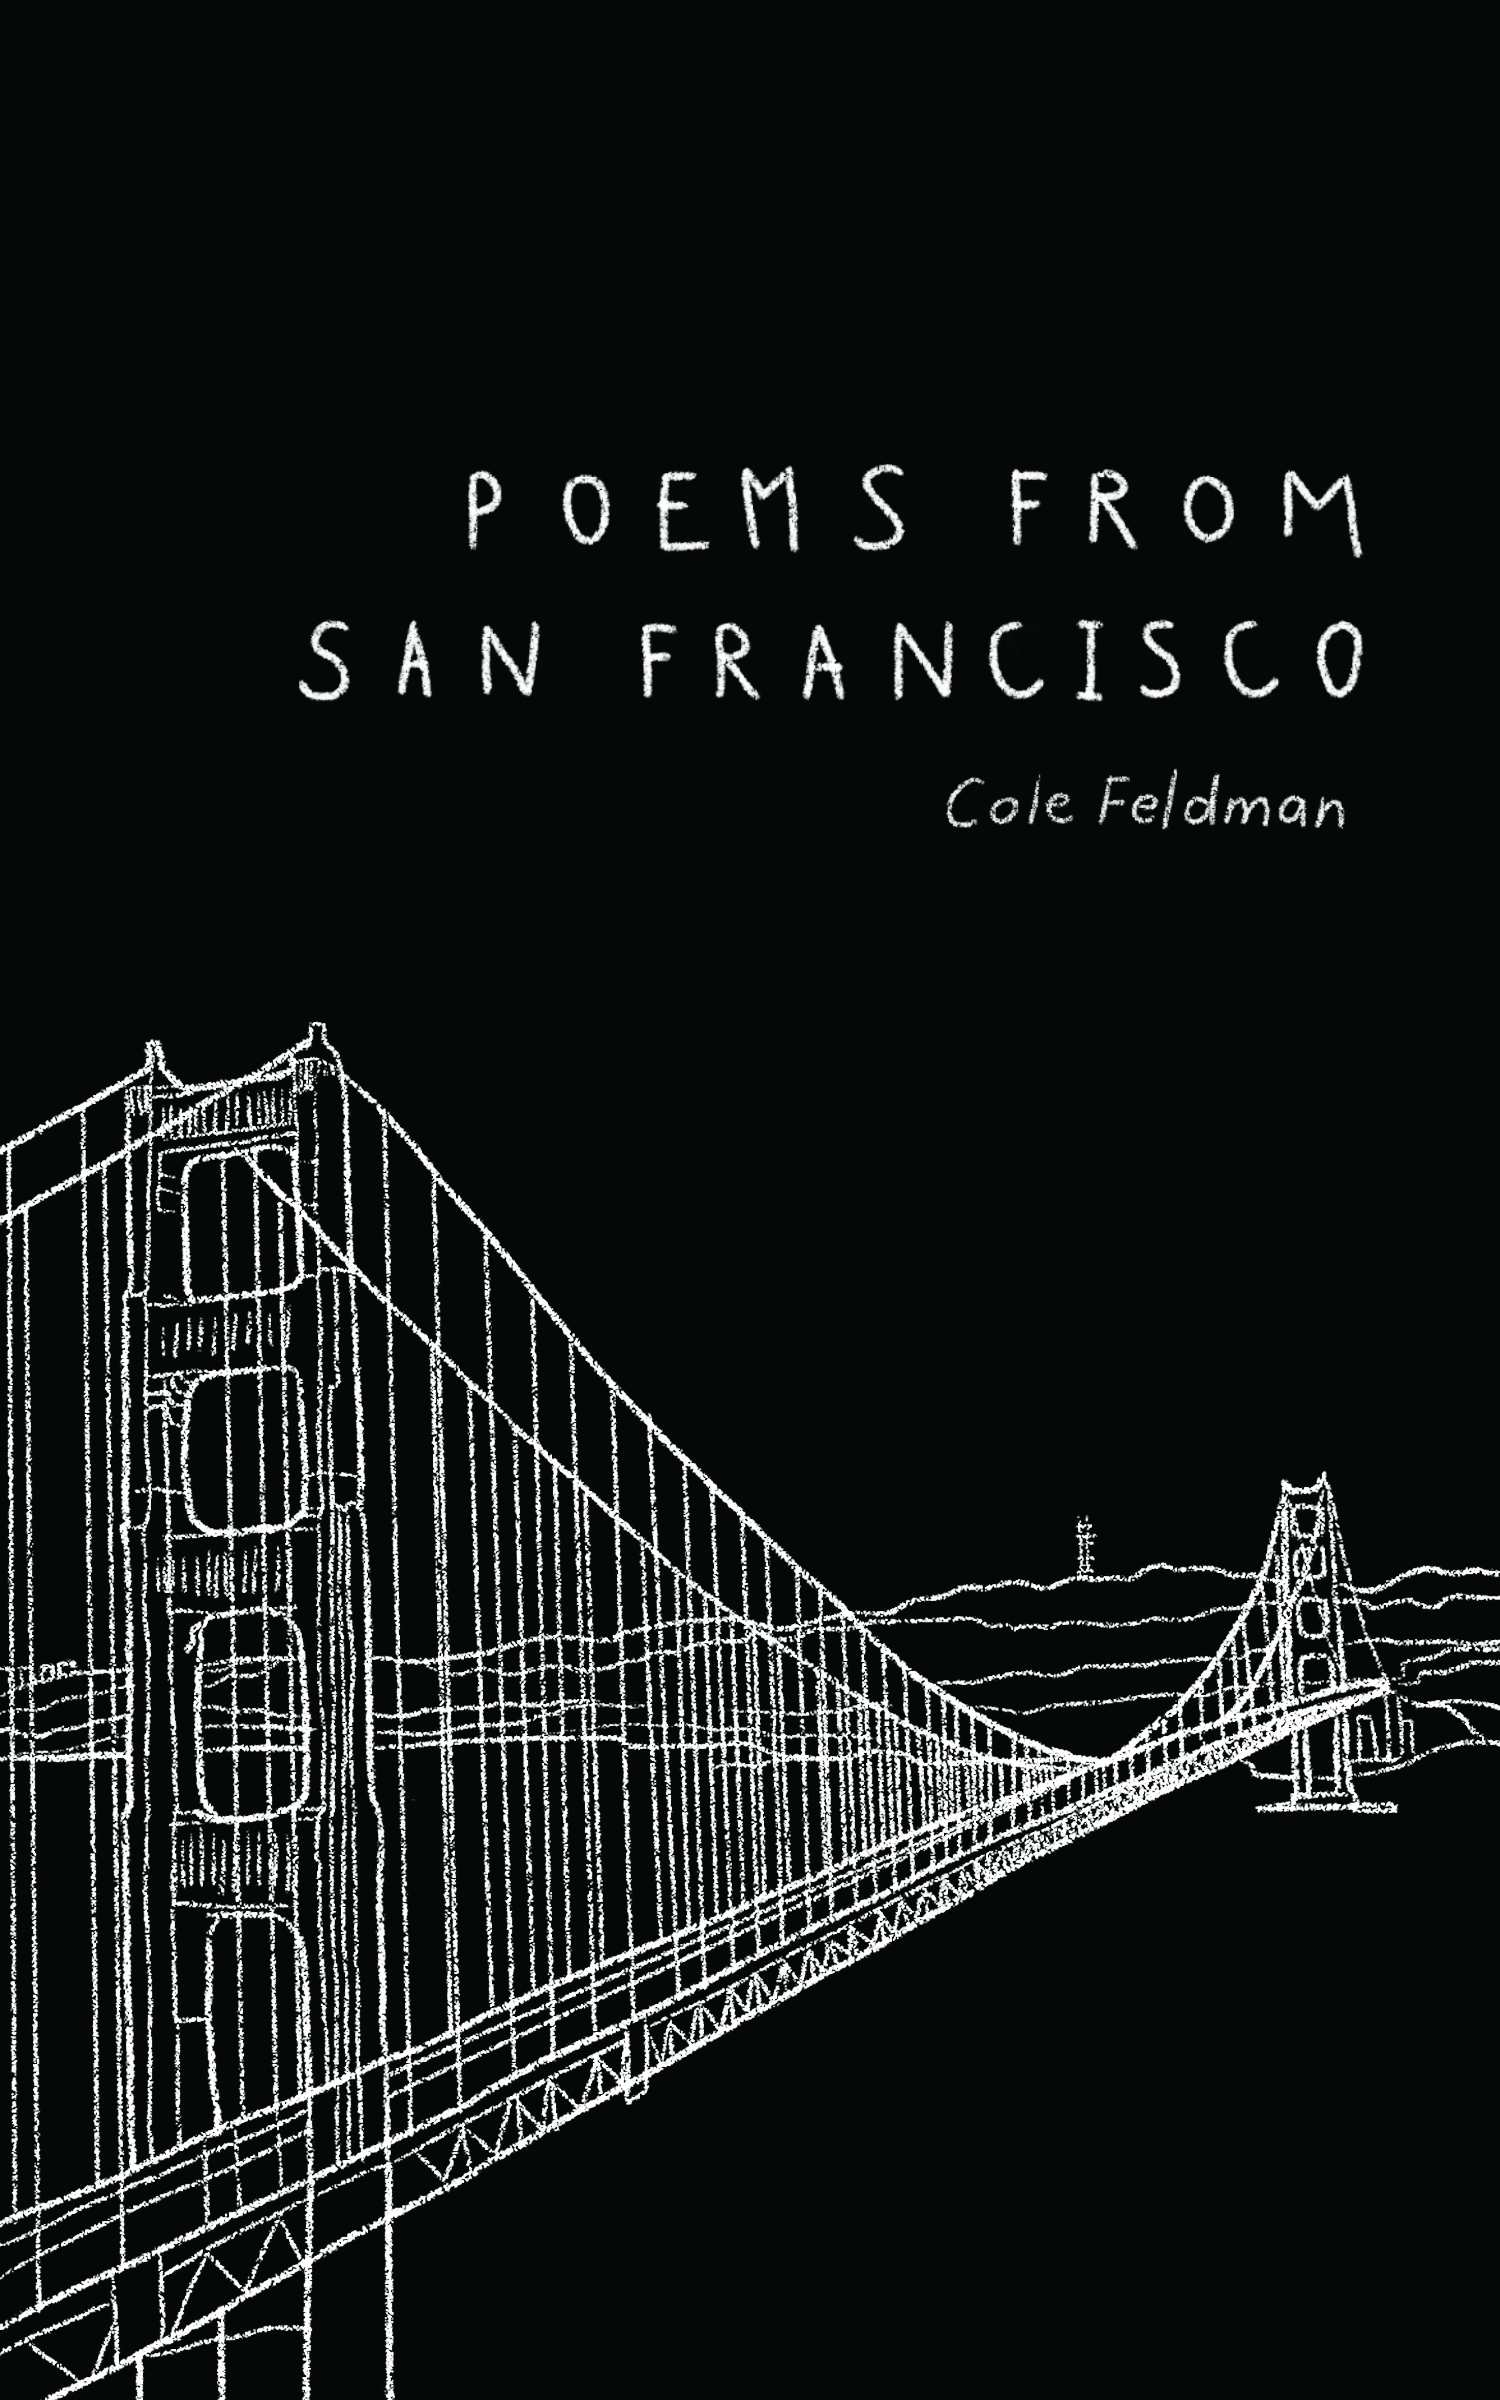 Front cover of Poems from San Francisco, a book of poetry